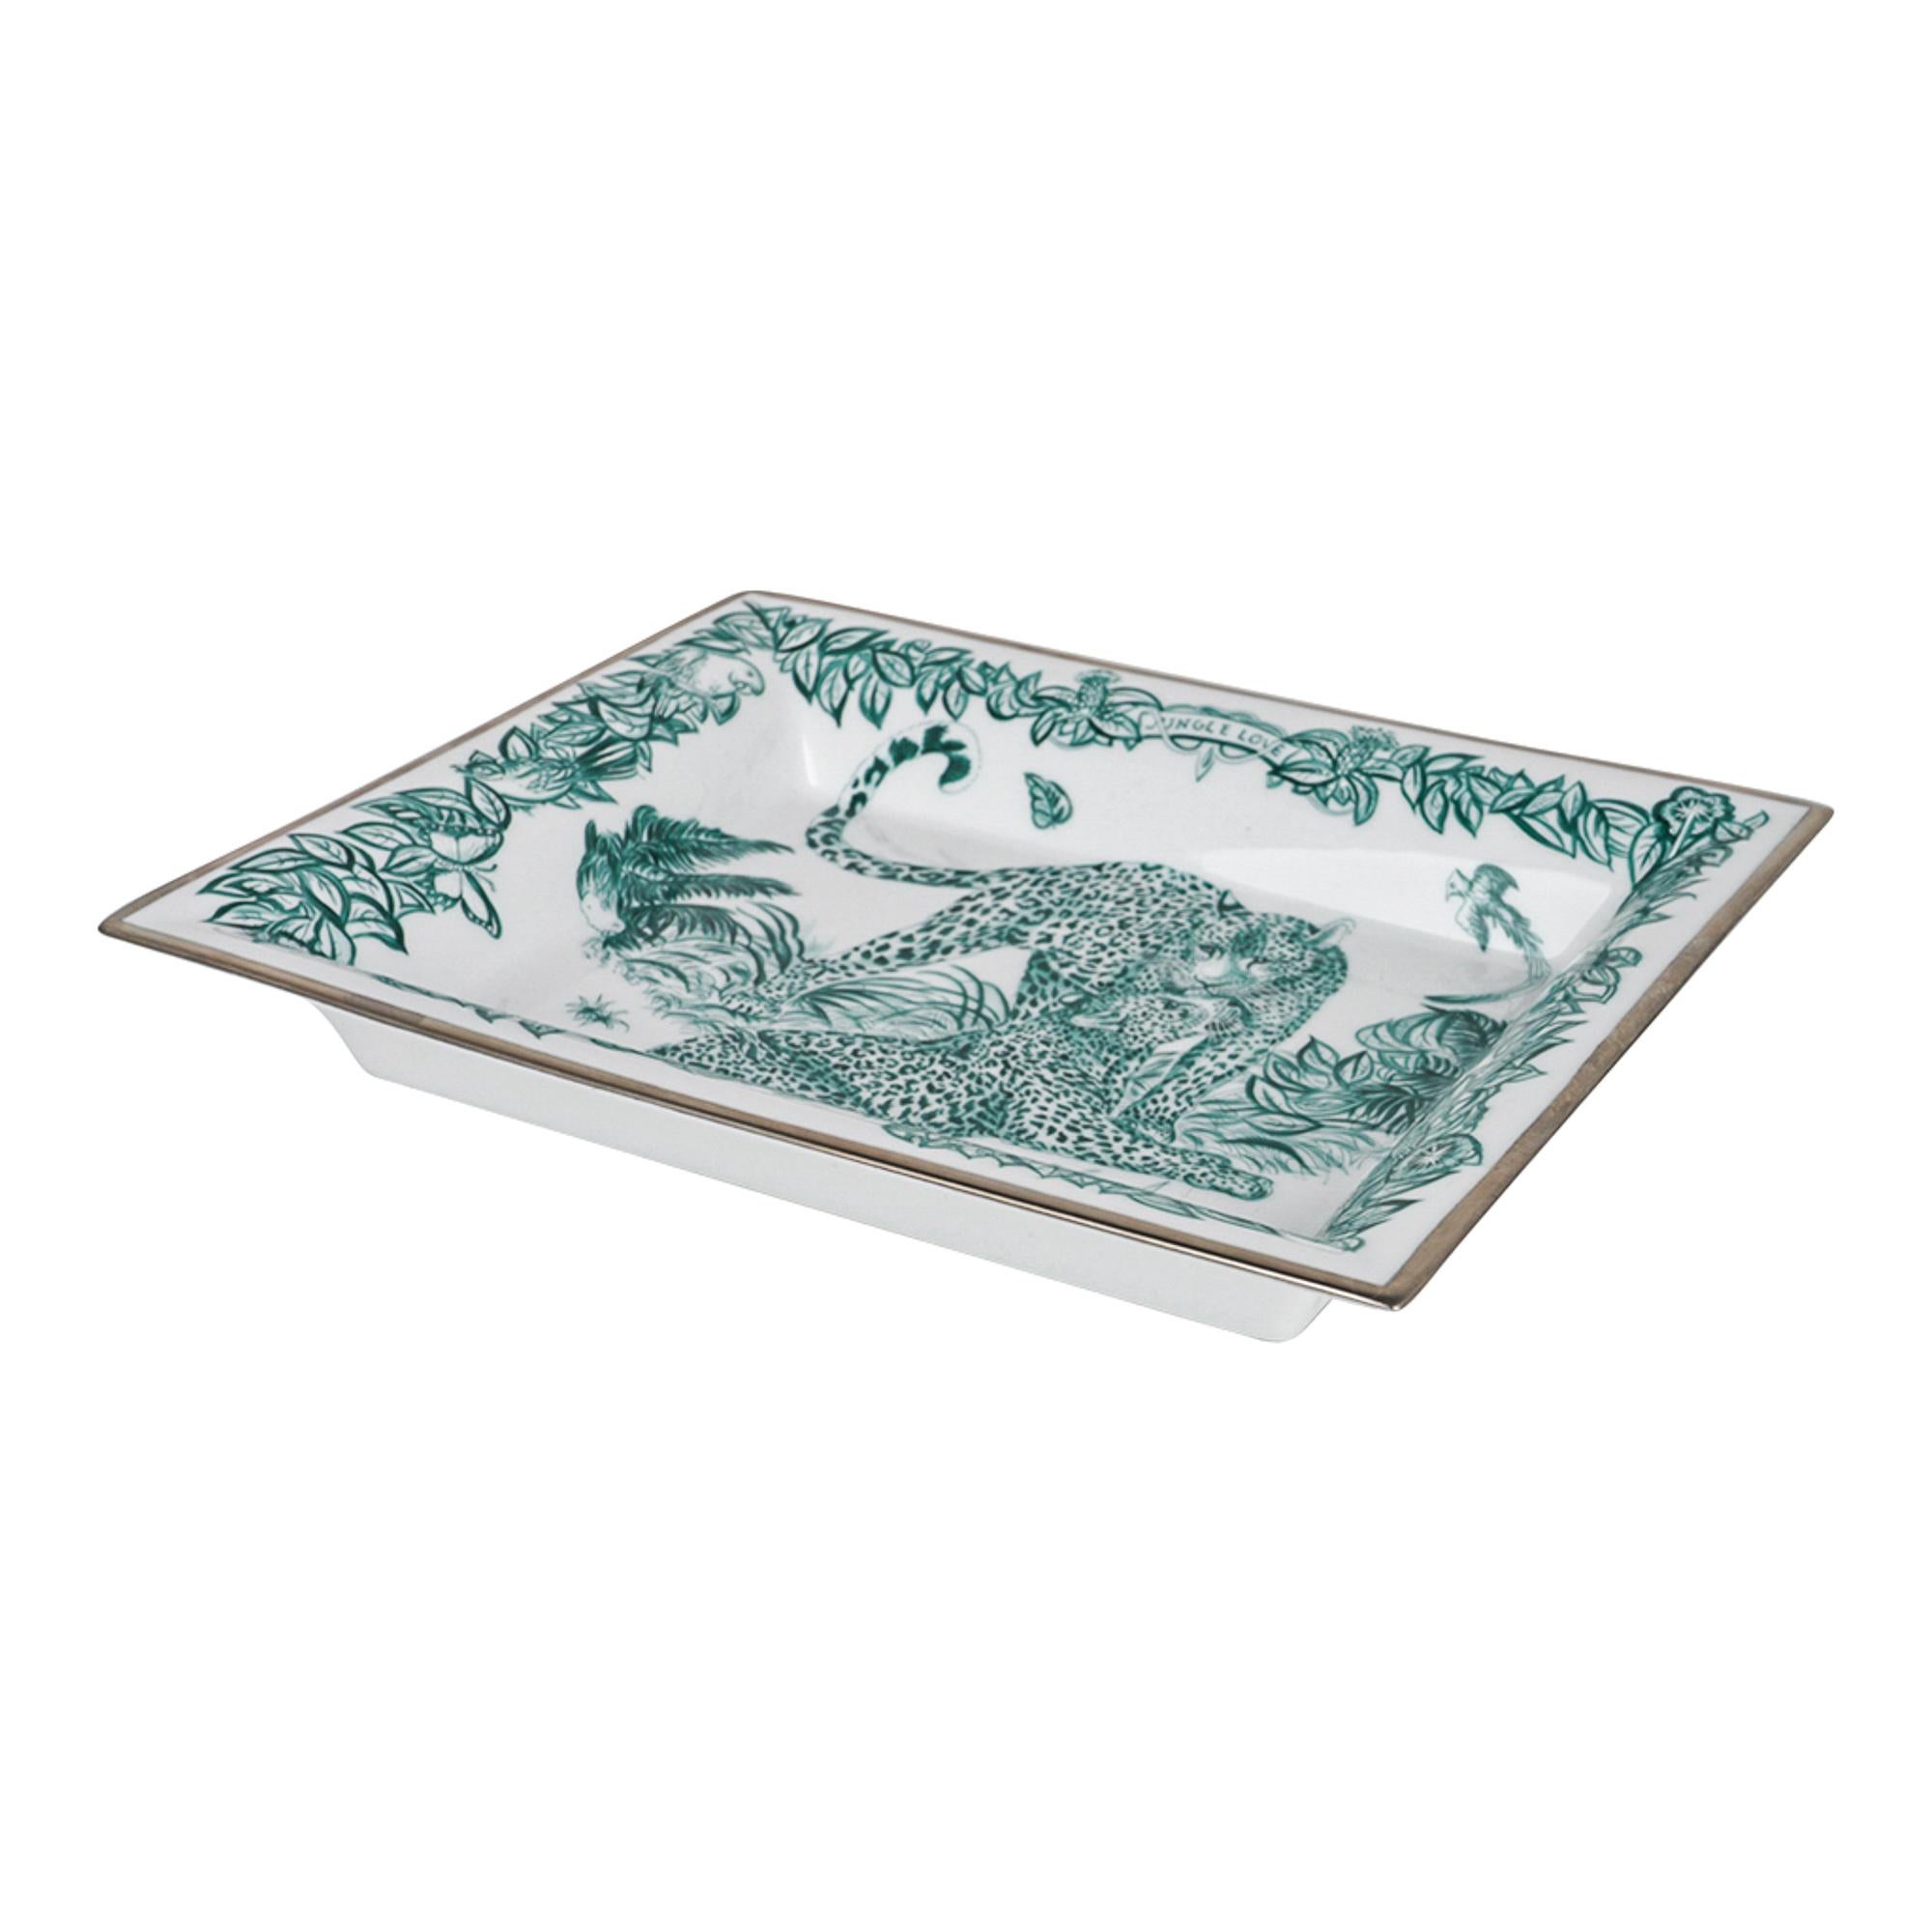 Hermes Tray Jungle Love Emerald Limoges Porcelain New w/ Box In New Condition For Sale In Miami, FL